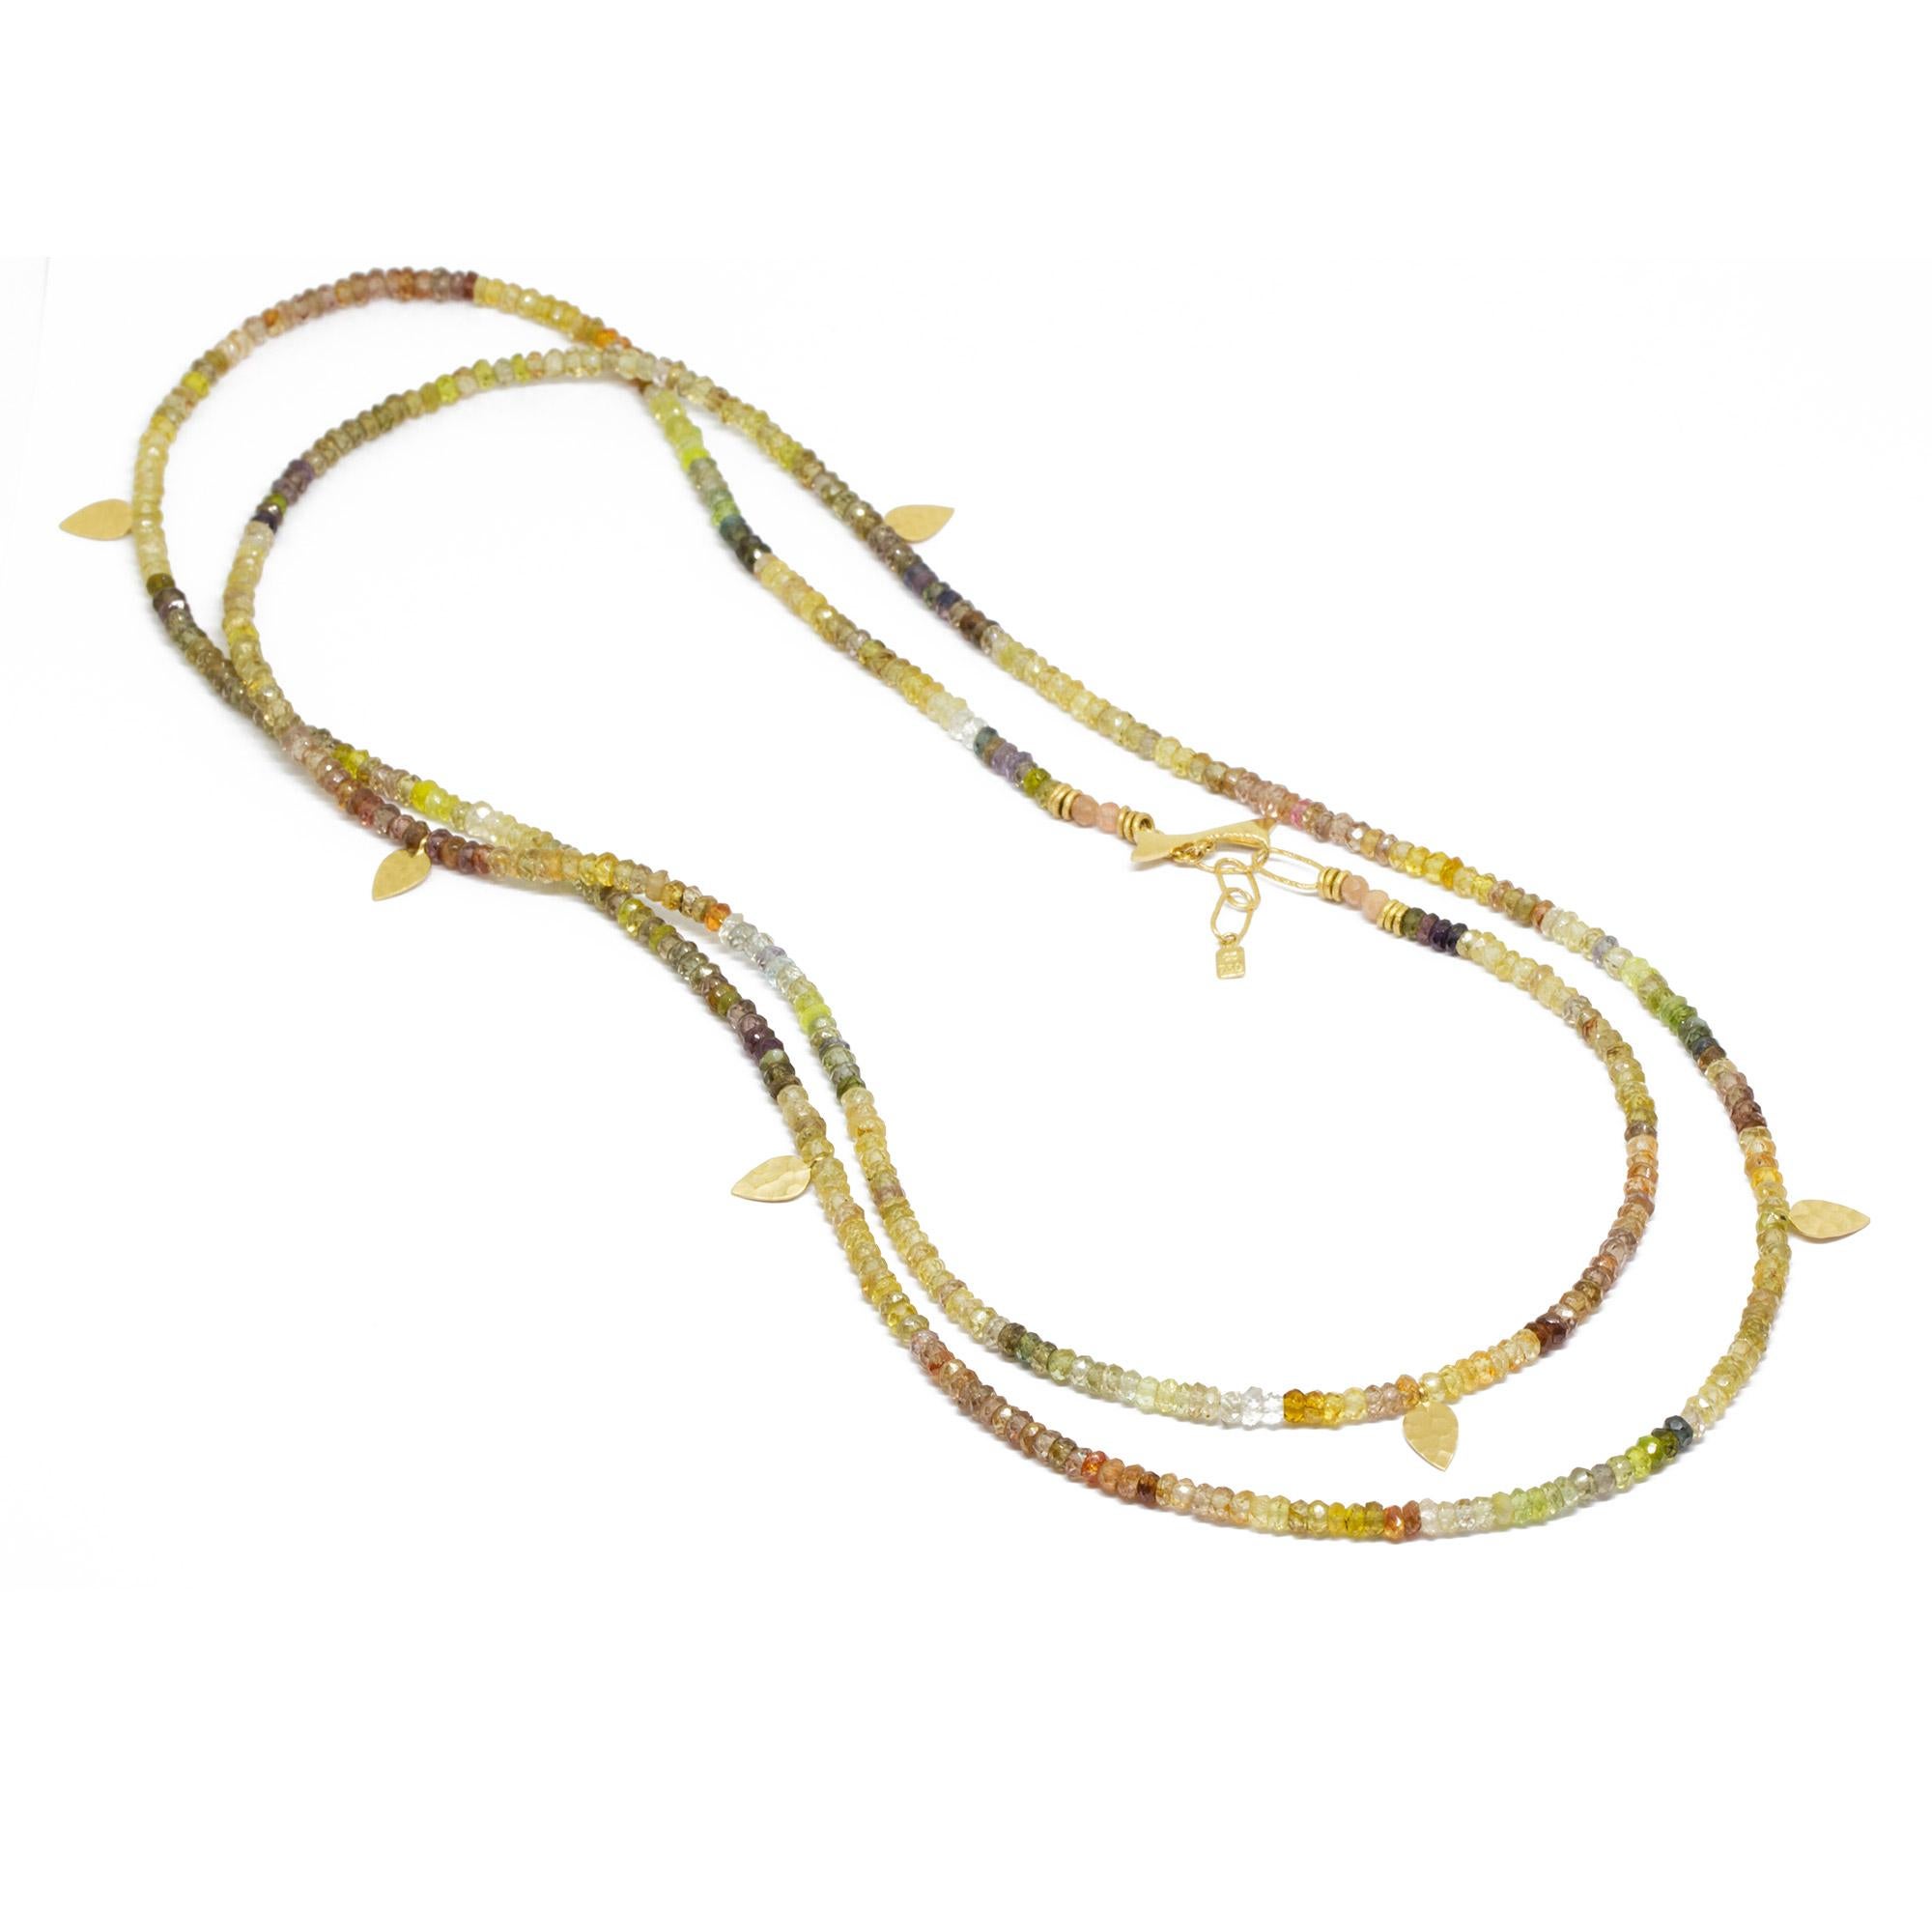 The best part about our Heritage Natural Zircon Necklette isn’t just that it can be worn long, doubled-up, or as a wrap bracelet (although that’s pretty cool). It’s that you can thread any of our Charms onto the natural zircon beads—have fun playing